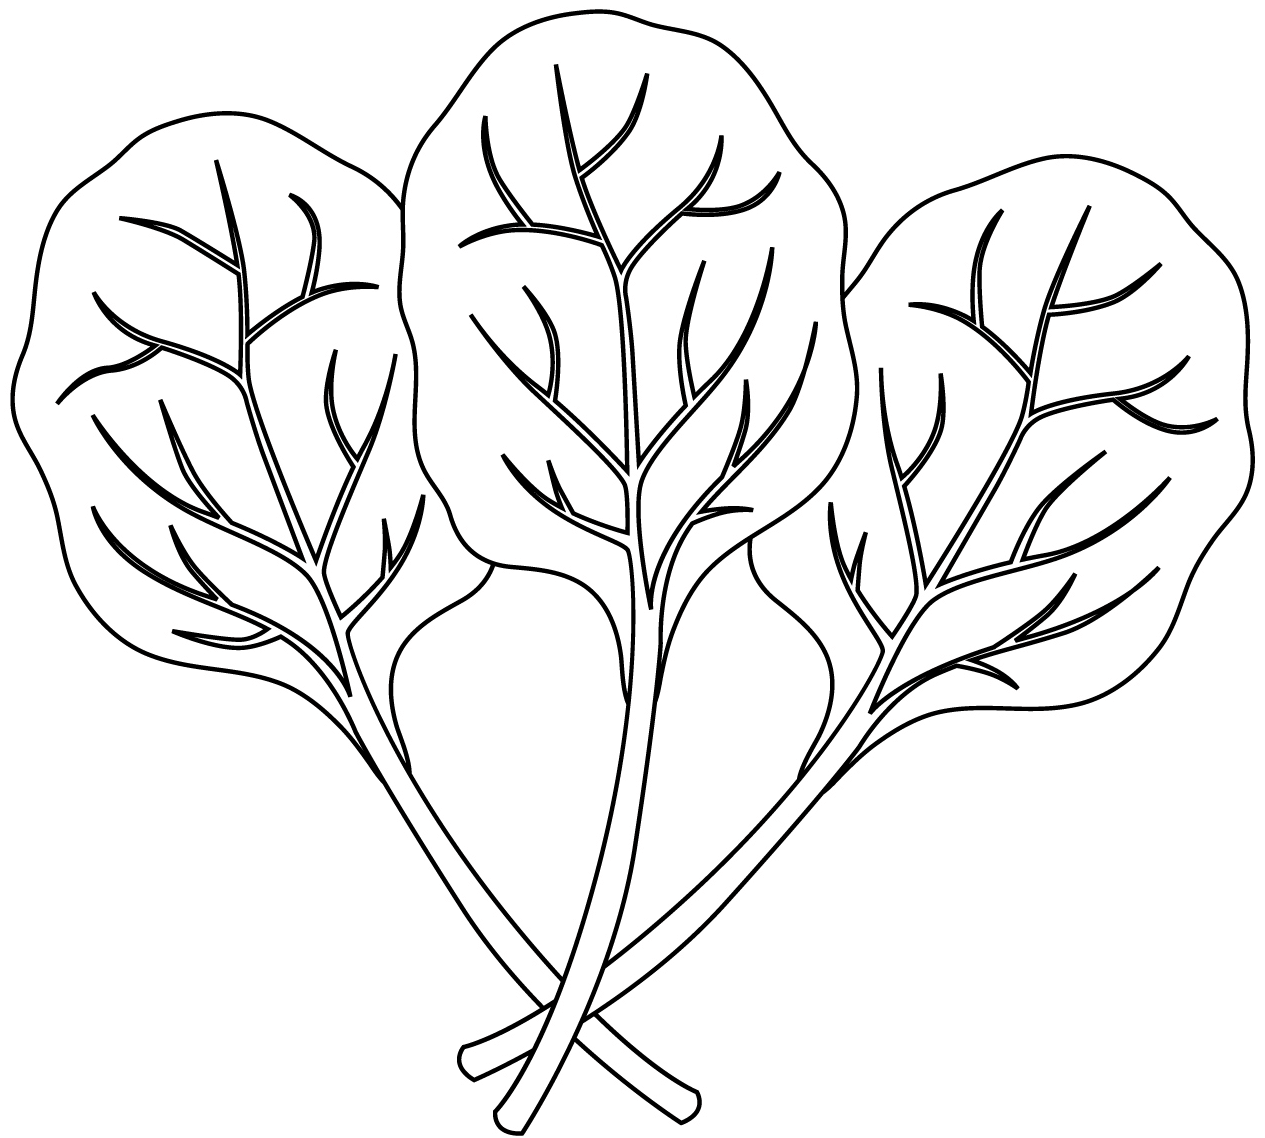 Spinach coloring page - ColouringPages